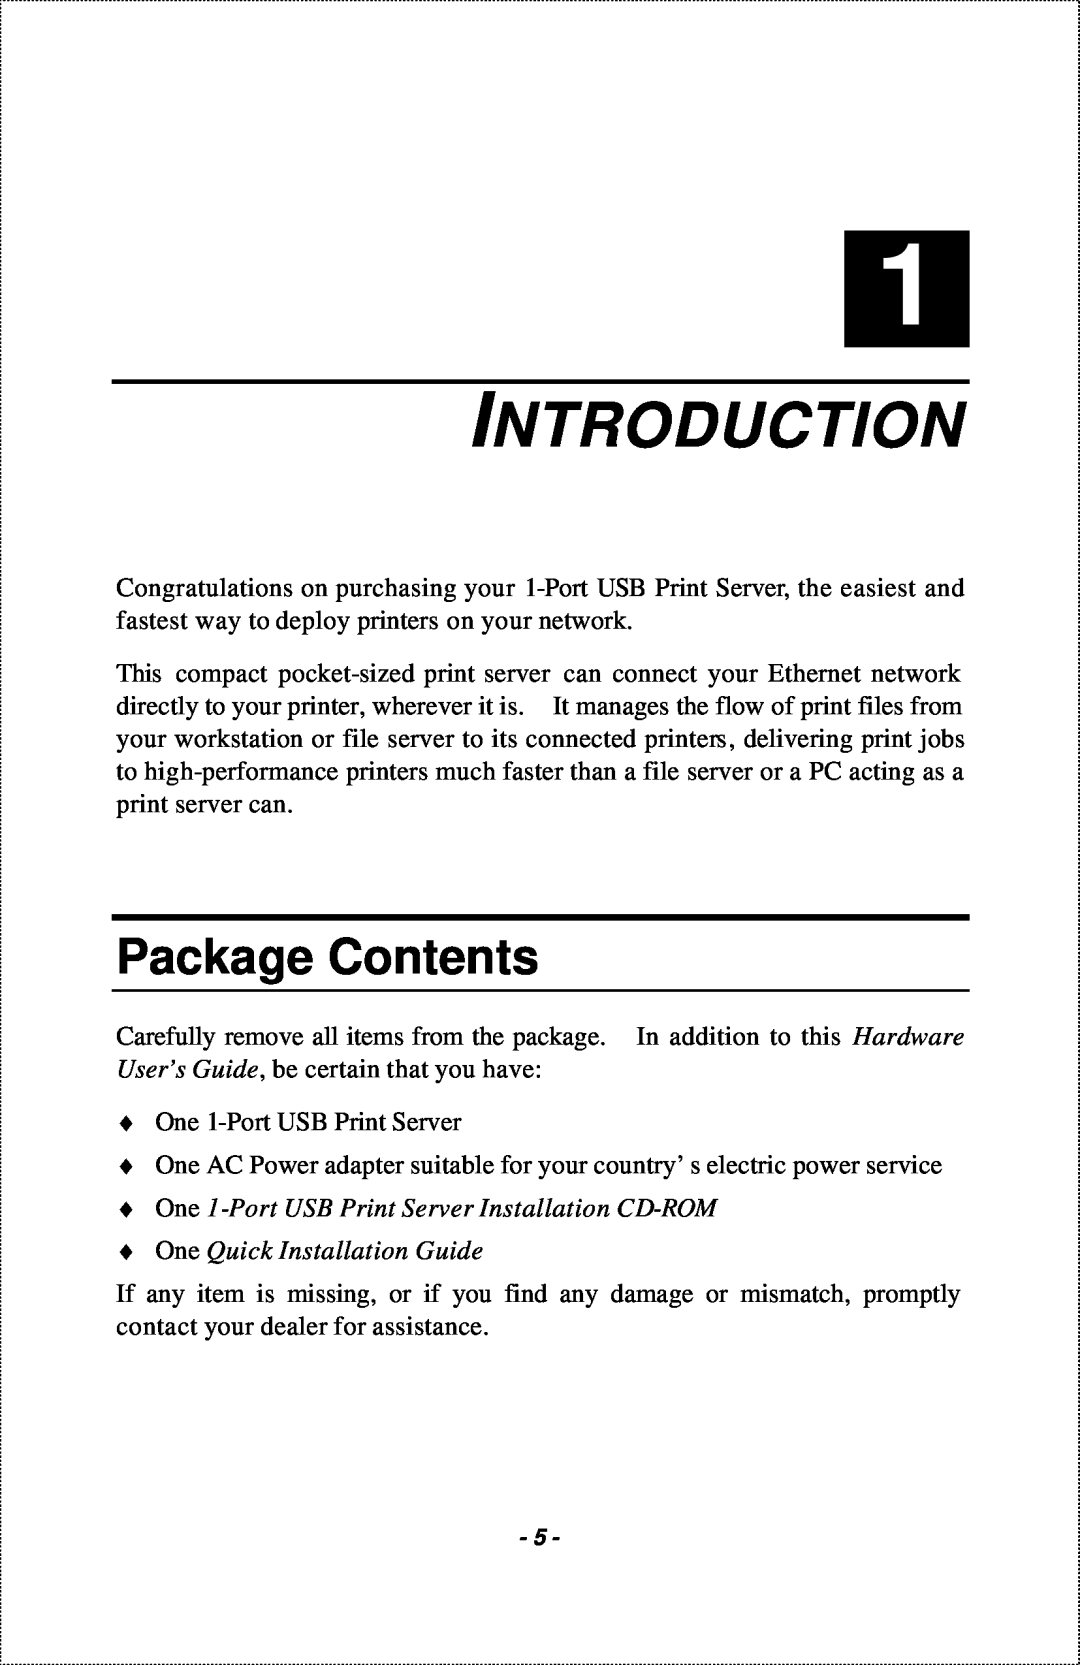 IBM manual Introduction, Package Contents, One 1-Port USB Print Server Installation CD-ROM, One Quick Installation Guide 